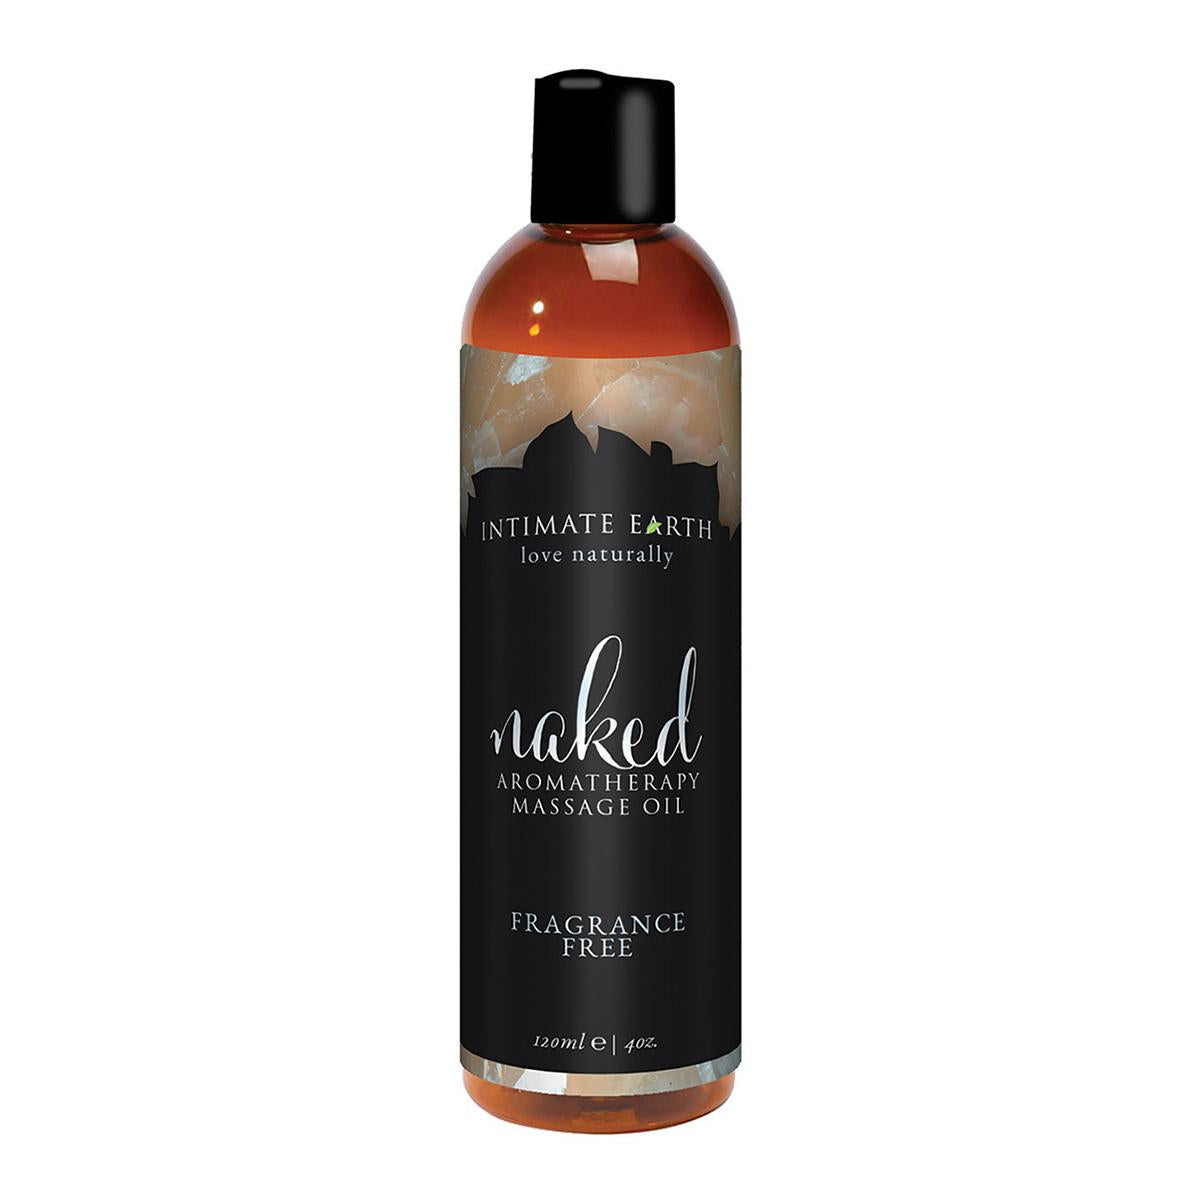 Intimate Earth Massage Oil - Naked 4oz